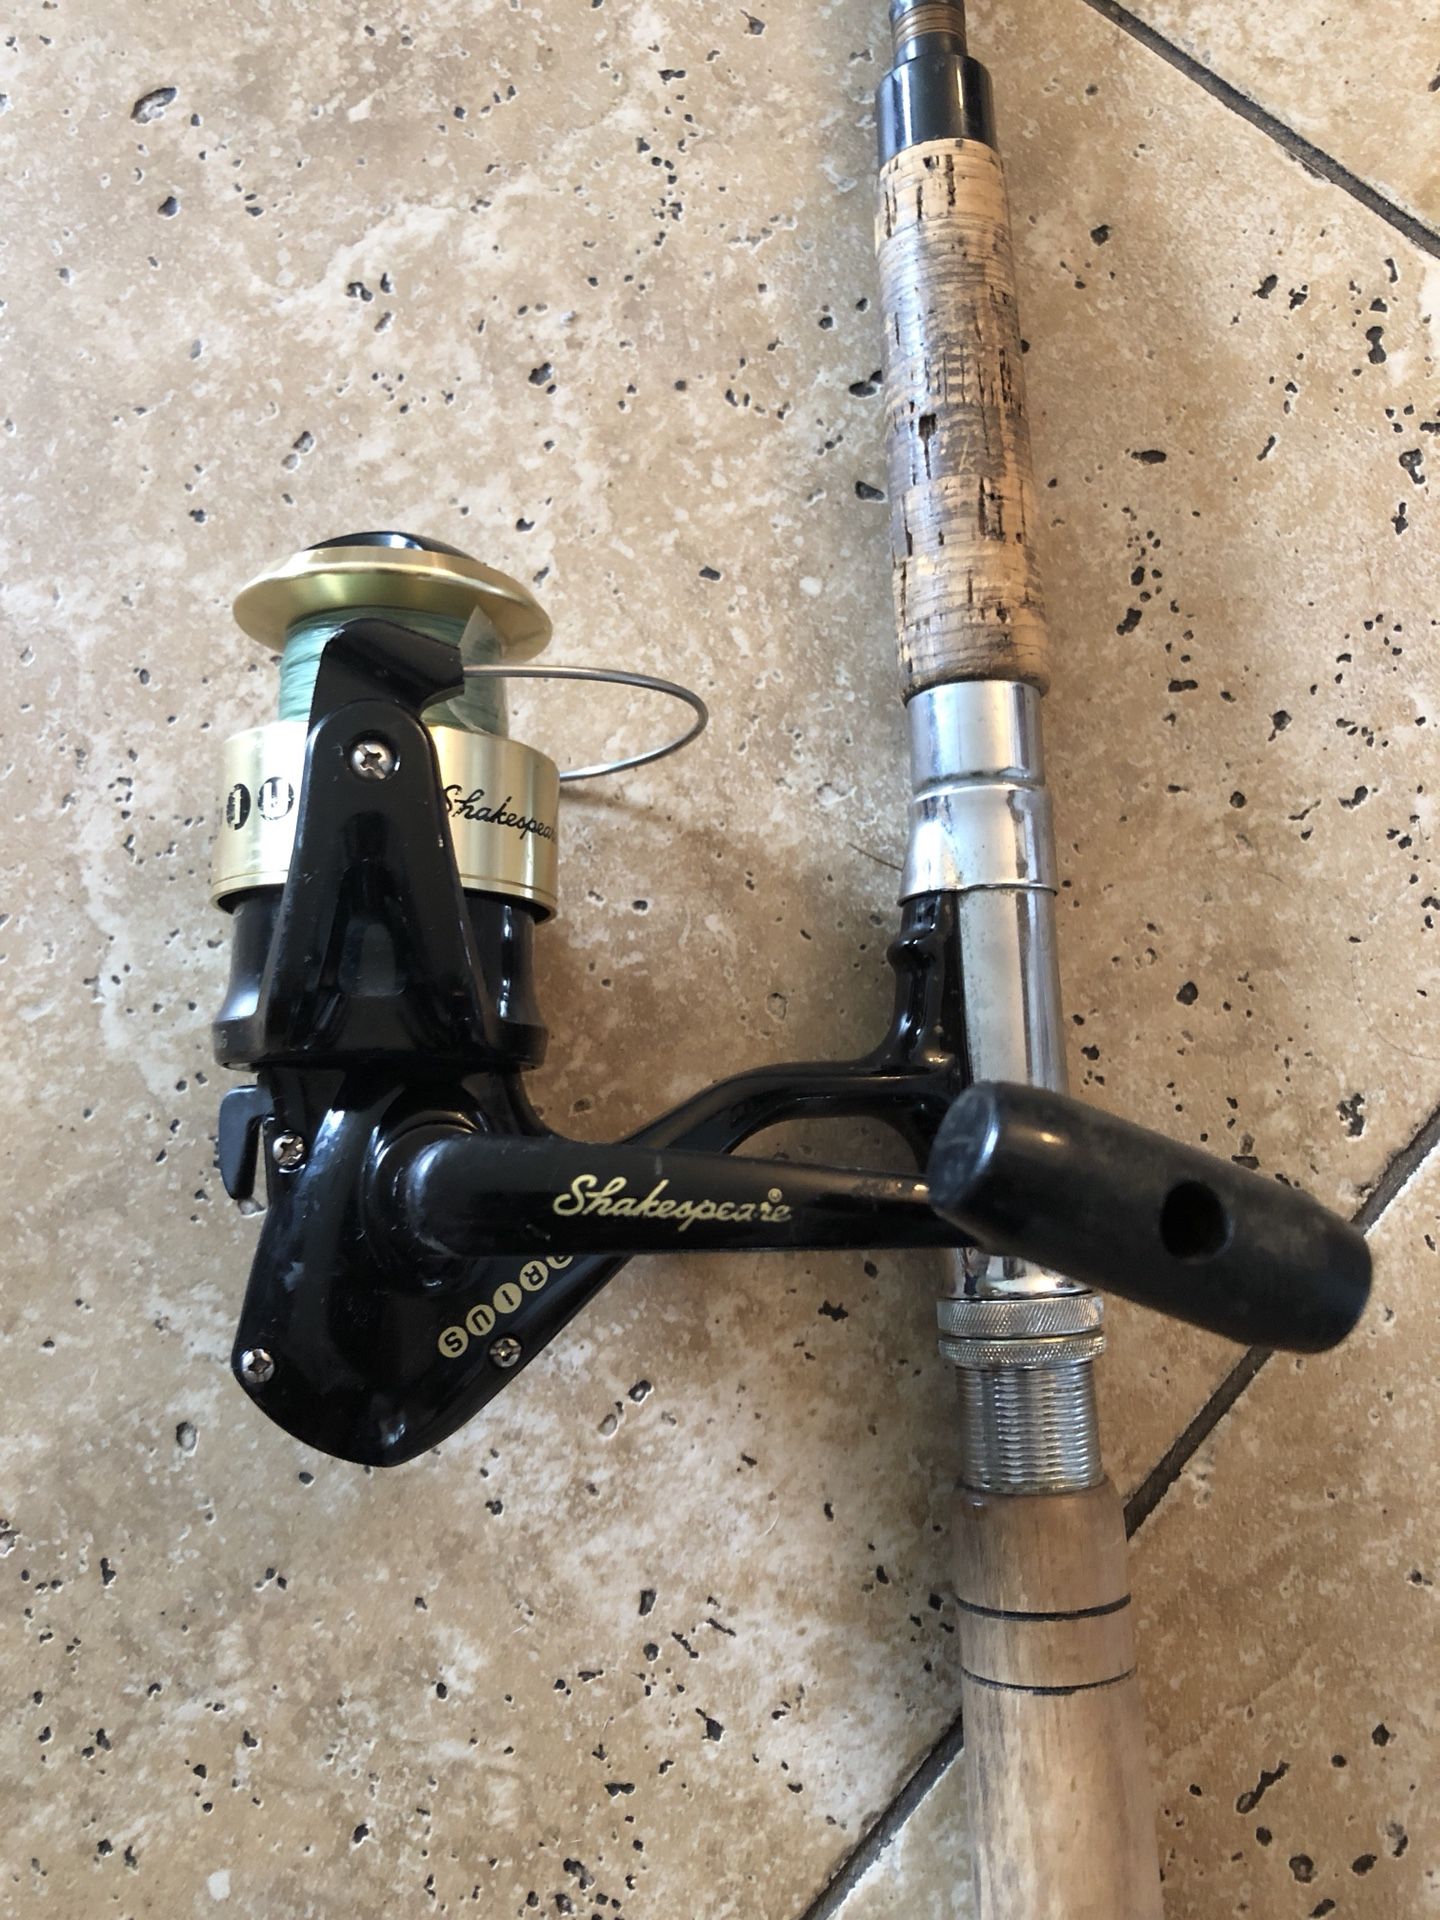 Shakespeare Prius fishing rod and reel combo for Sale in Miami, FL - OfferUp